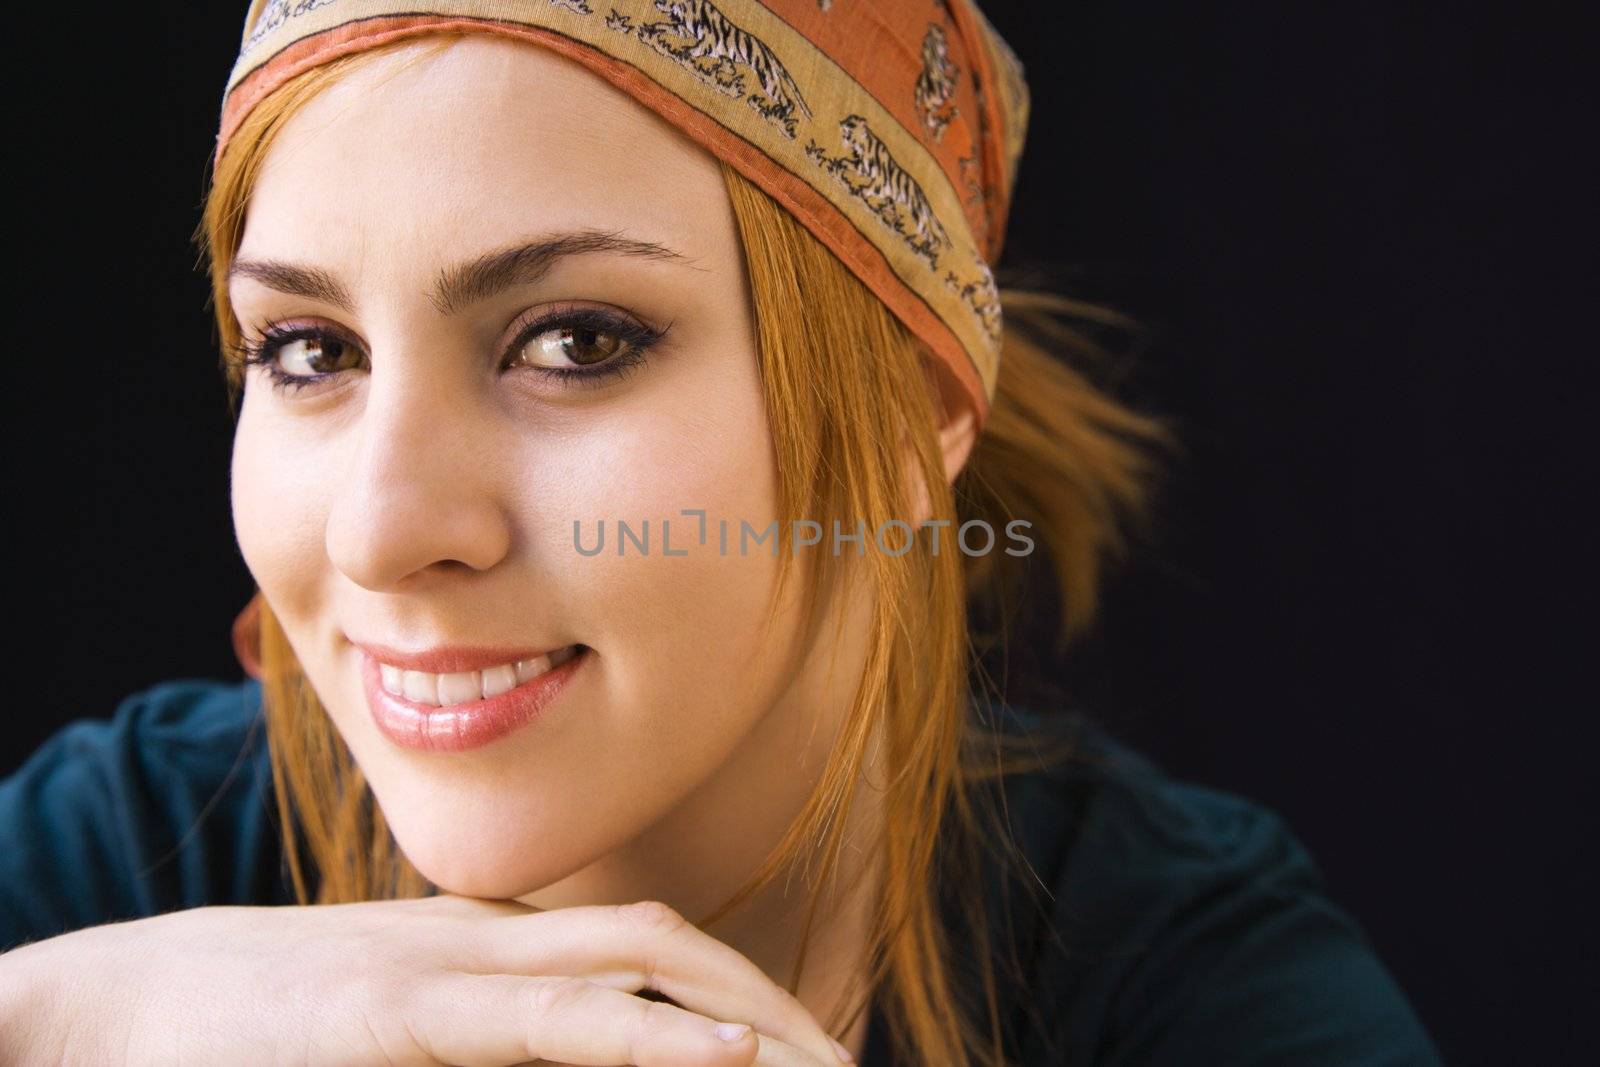 Smiling woman in cap by iofoto